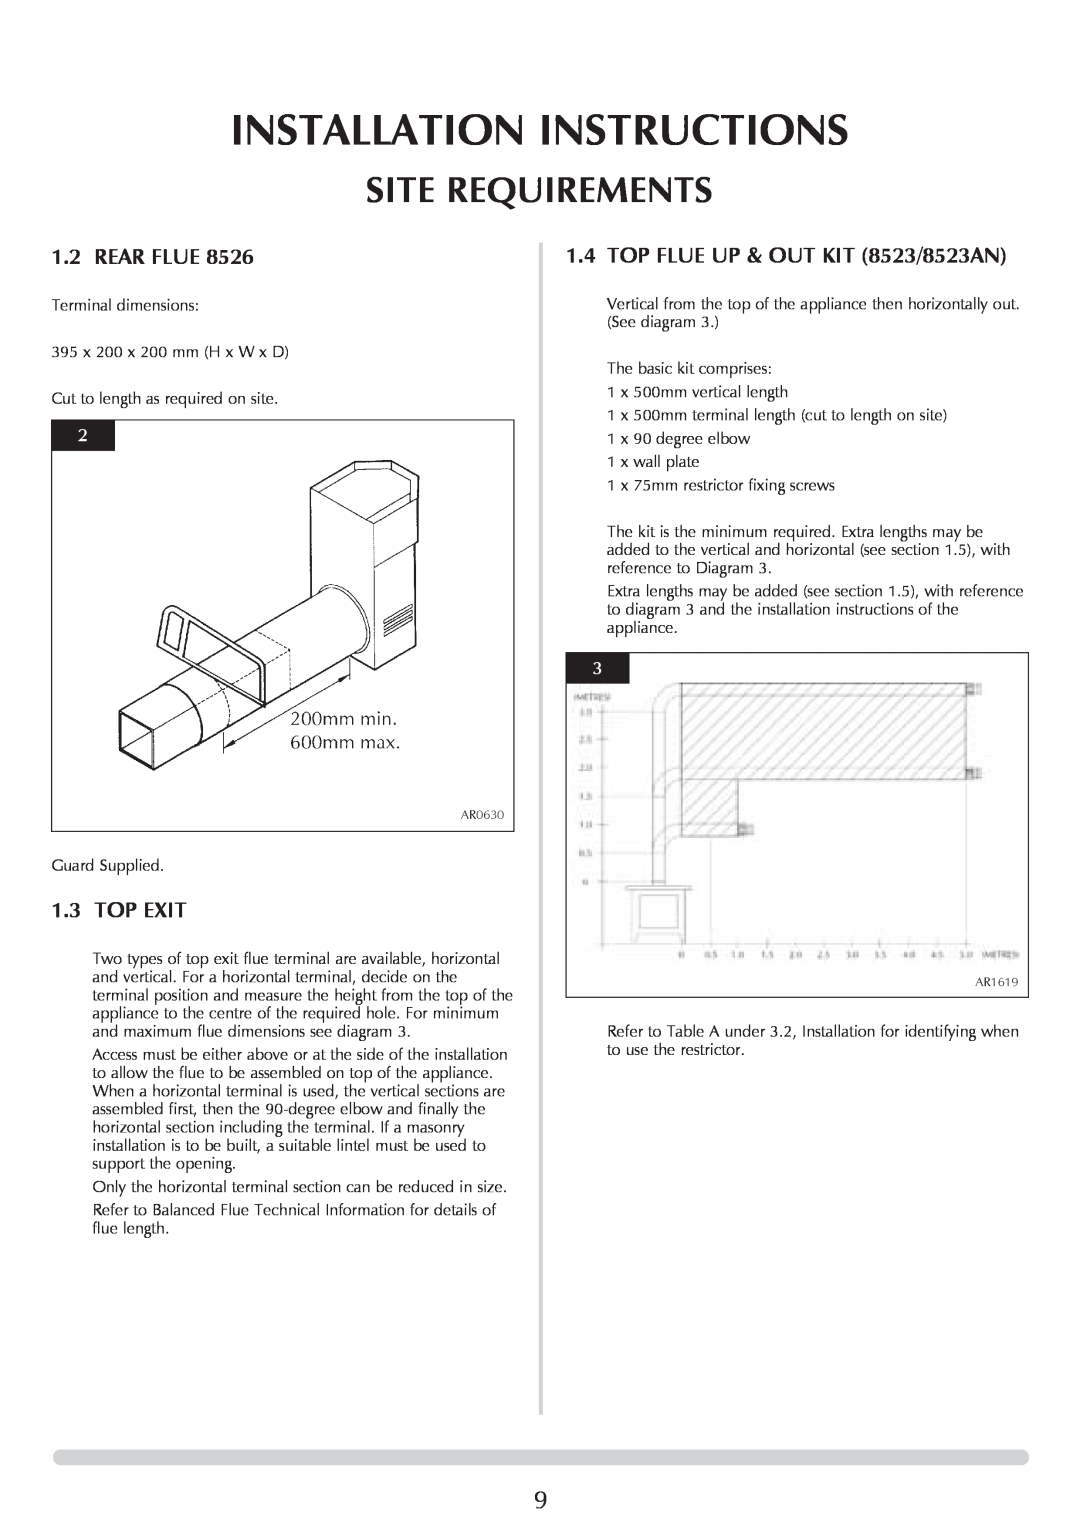 Stovax Ceramica Manhattan Wood Stove manual Installation Instructions, Site Requirements, Rear Flue, Top Exit 